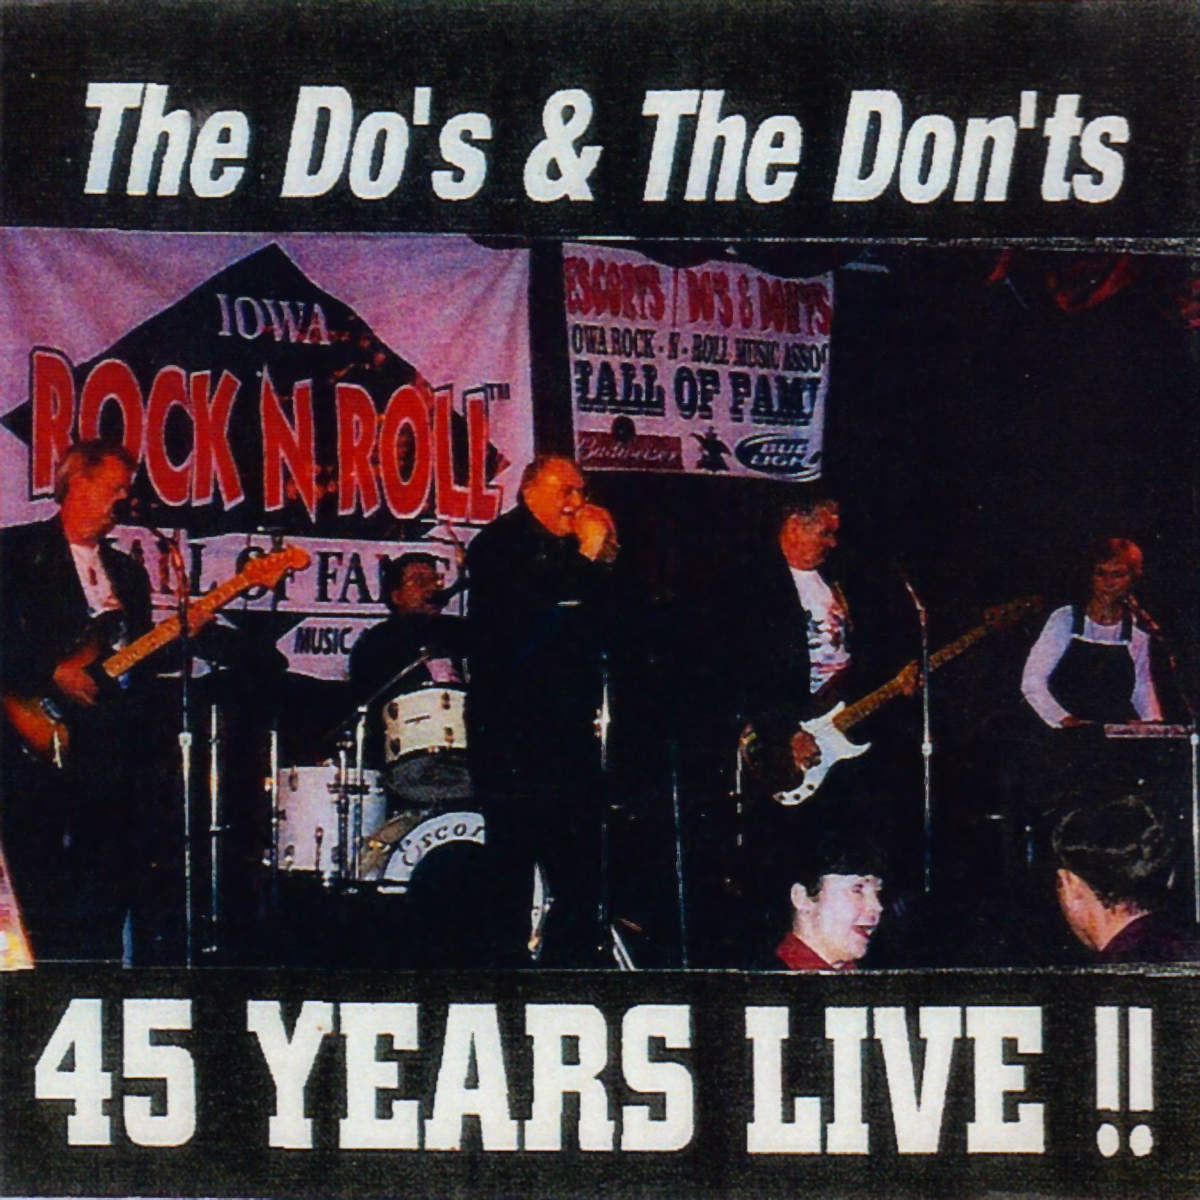 The Do's & Don'ts 45 Years Live CD